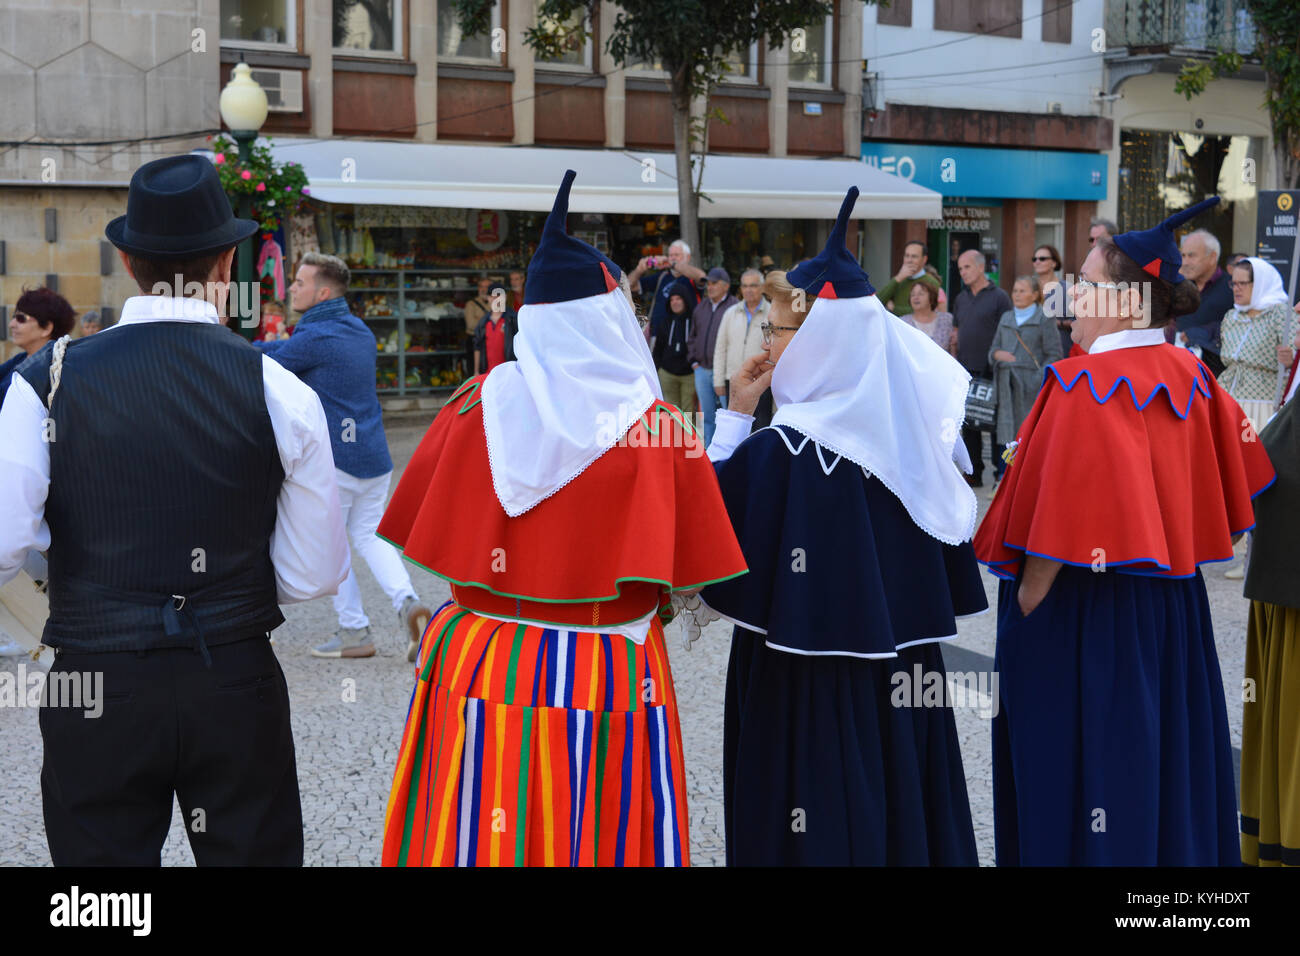 Candid view 4 folk singers with carapuca caps accompanying a group of folk dancers with spectators looking on, Funchal, Madeira, Portugal Stock Photo